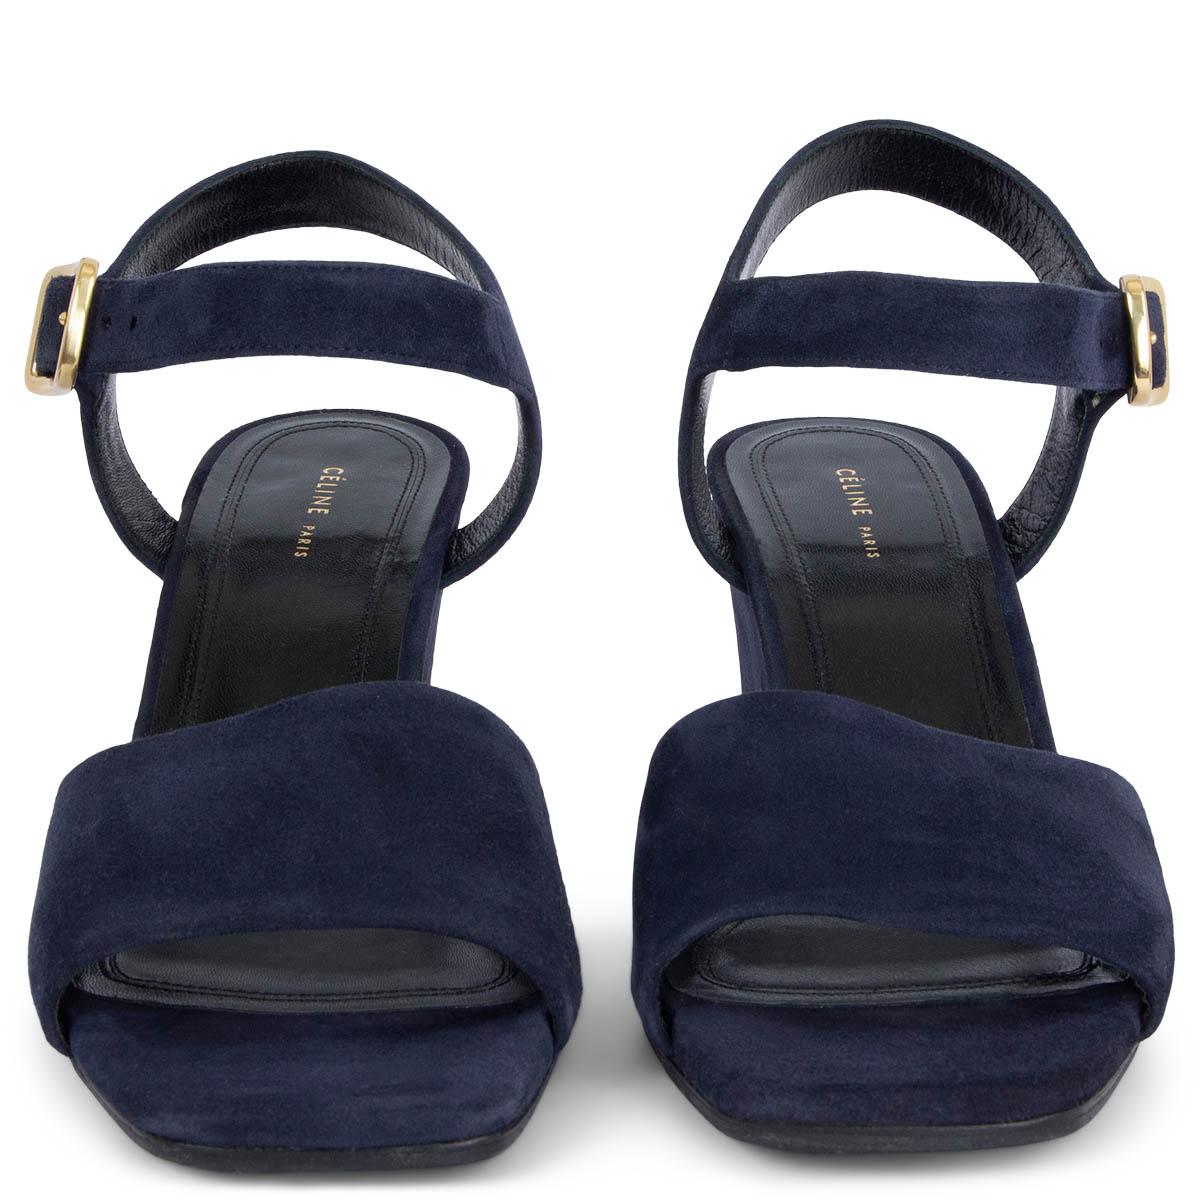 100% authentic Céline block heel sandals in navy blue suede with gold-tone buckle closure. Have been worn and are in excellent condition. Rubber sole got added. 

2016 Spring/Summer

Measurements
Imprinted Size	36
Shoe Size	36
Inside Sole	23cm